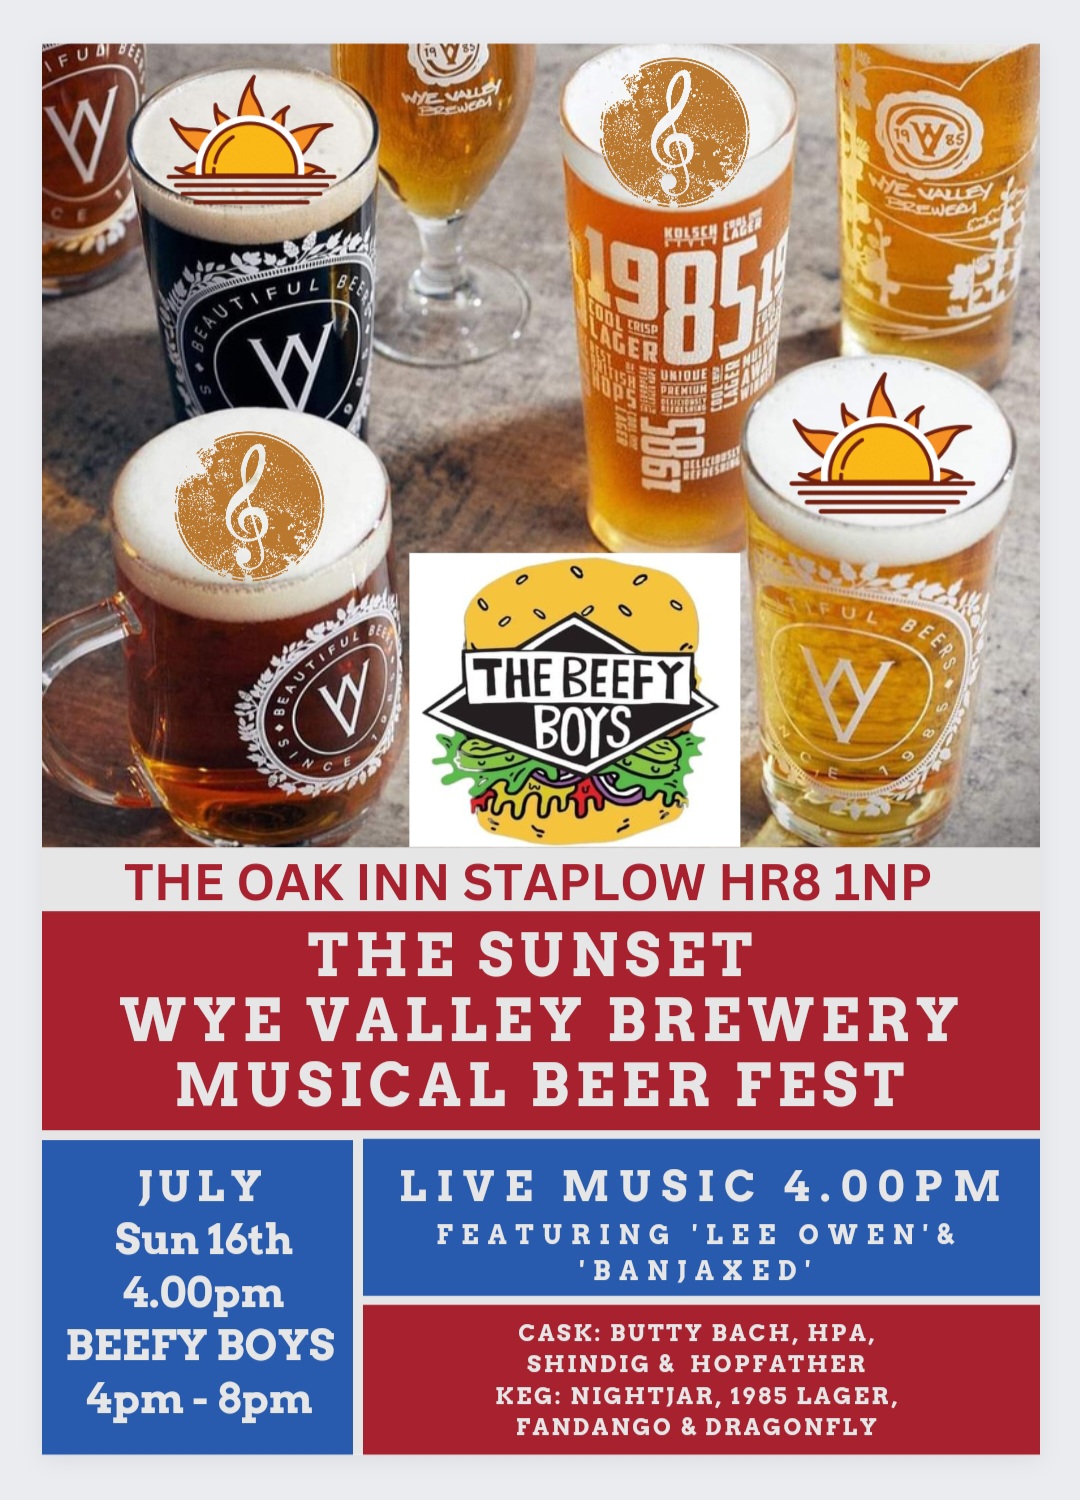 Join us for an exciting WEEKEND "WYE VALLEY BREWERY SUMMER BEER FESTIVAL" plus FREE LIVE MUSIC at 4pm on Sunday 16th - featuring LEE OWEN & BANJAXED. Plus COSMIC CIDER POP-UP plus BEEFY BOYS on 16th 4.00pm until 8.00pm. Enjoy the MUSIC in our SOUTH WEST FACING BEER GARDEN and watch the SUNSET and beyond!